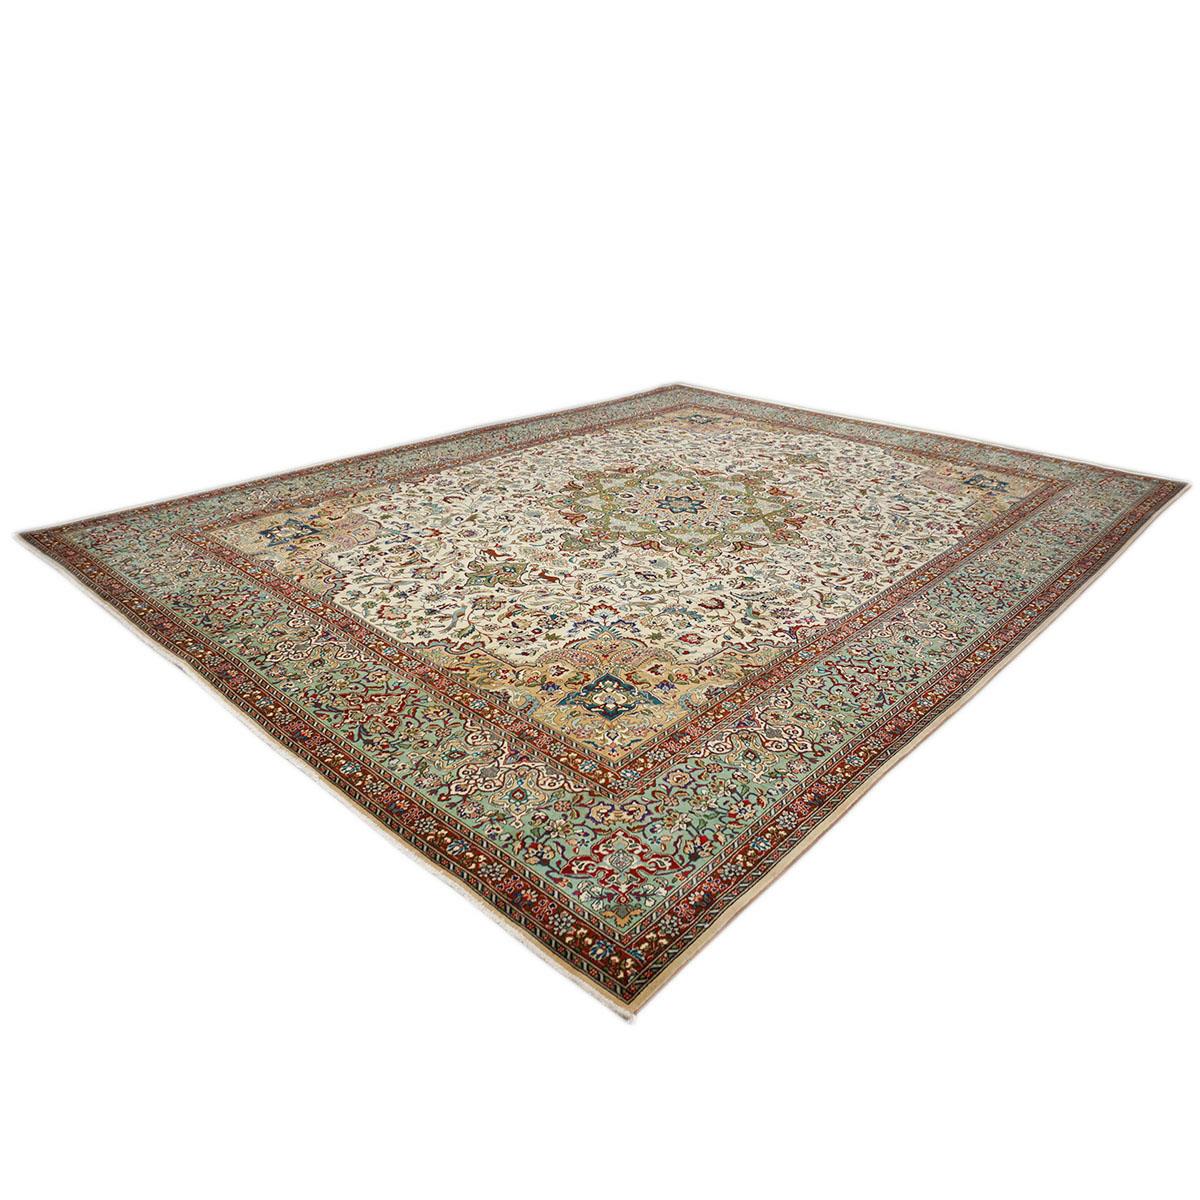 20th Century Persian Tabriz 9x13 Ivory, Light Green, & Red Handmade Area Rug In Good Condition For Sale In Houston, TX